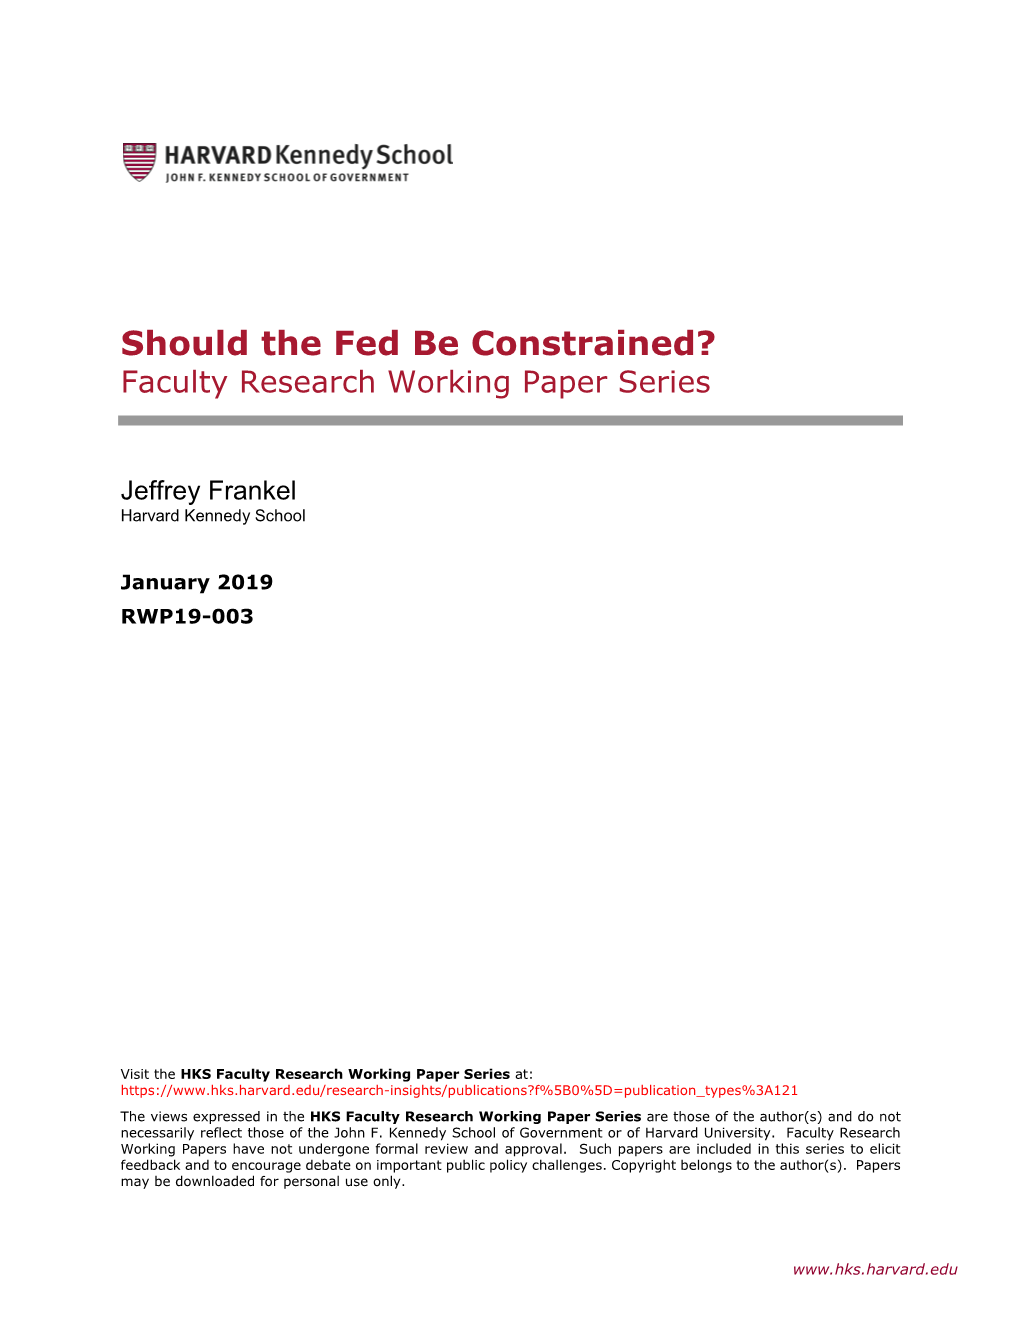 Should the Fed Be Constrained? Faculty Research Working Paper Series